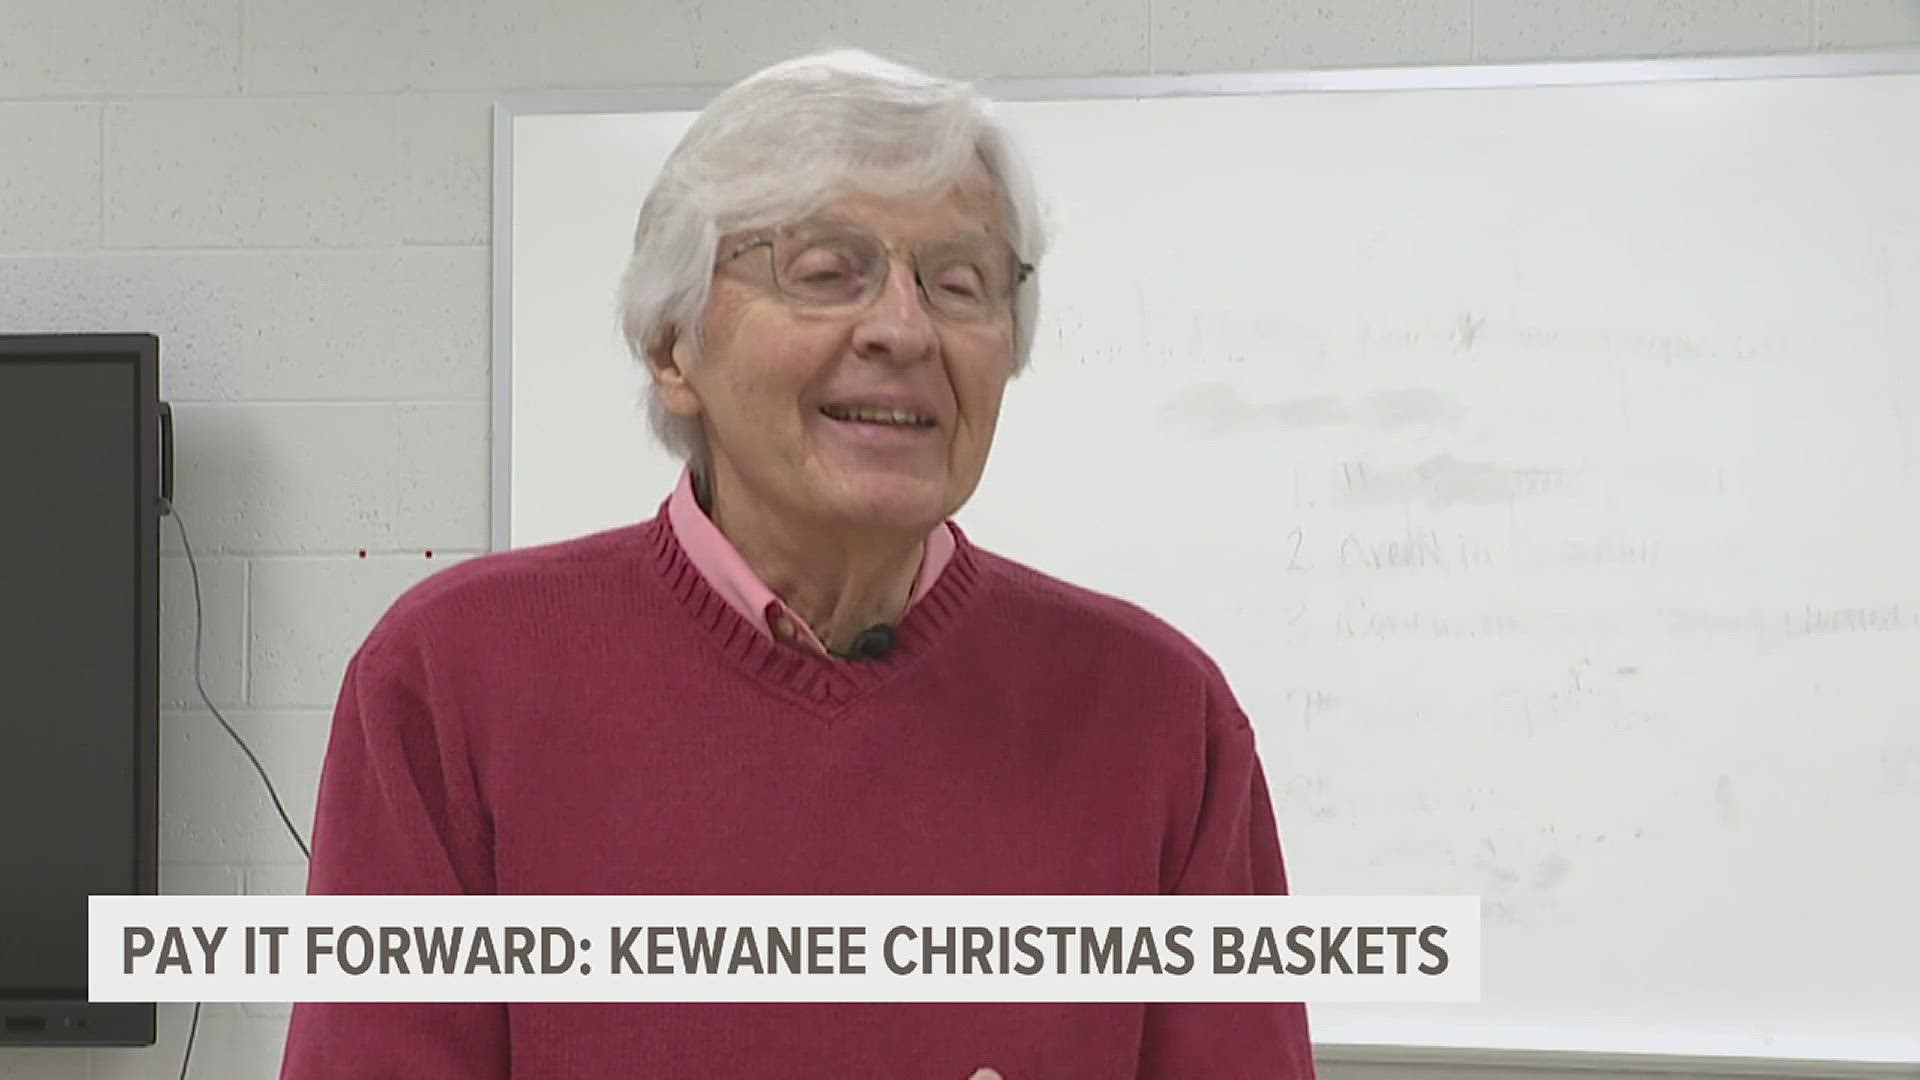 Good Fellow's Christmas Basket Club donates boxes filled with grocery items for families in need in Kewanee. It's a mission Ambron Buchanan takes seriously.